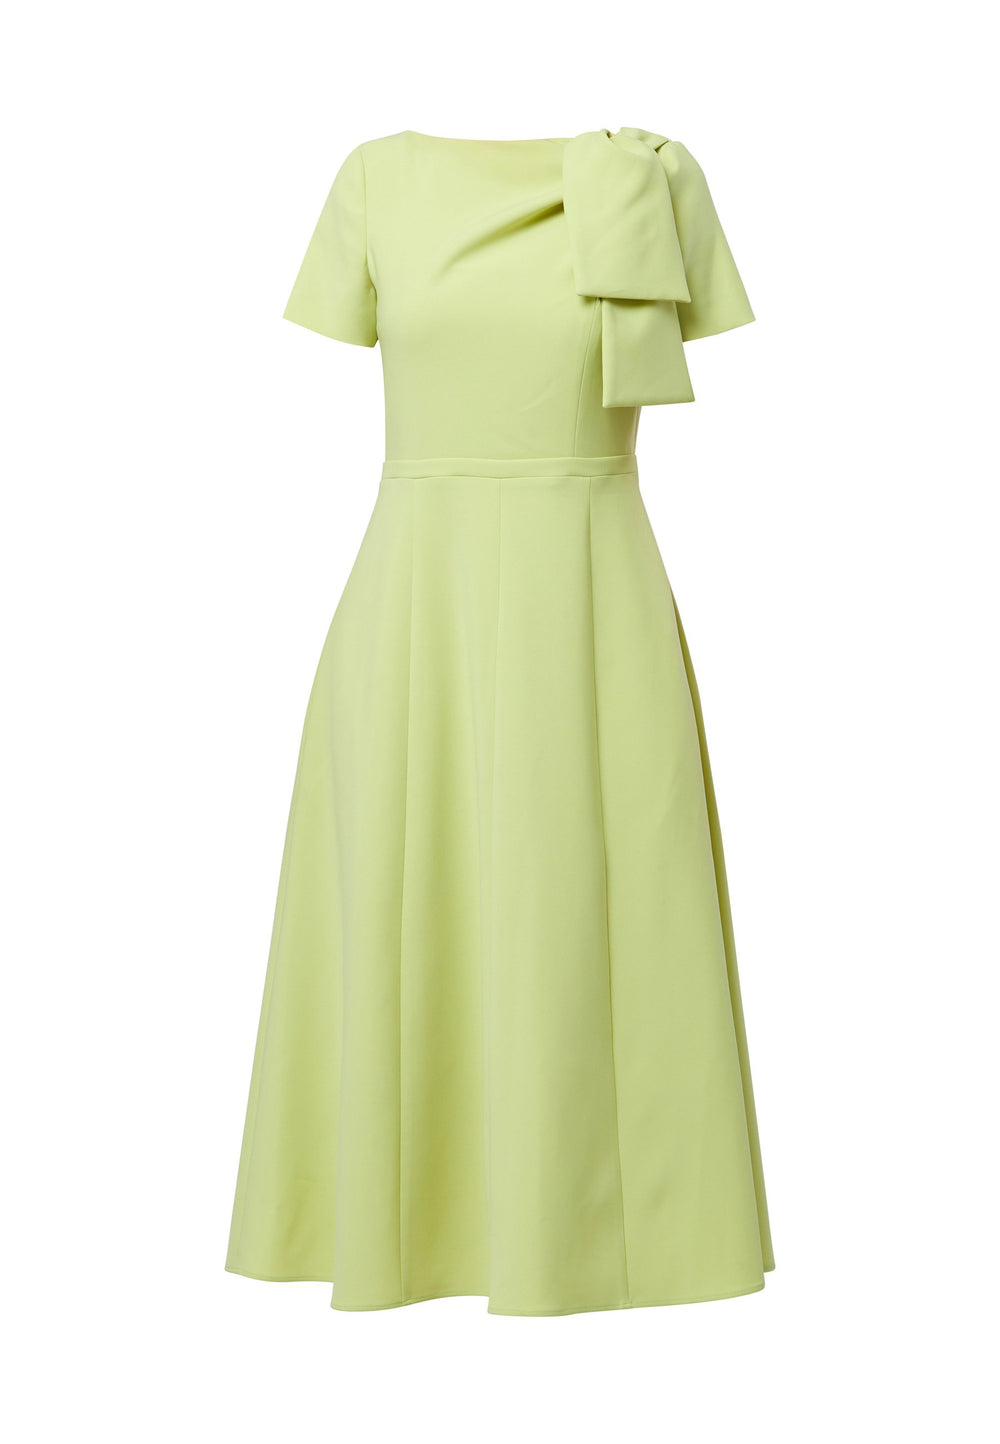 Introducing the Laoise Lime Dress, a refined statement piece designed exclusively for special occasions. Adorned with T-shirt-length sleeves and a meticulously fitted bodice, this dress features an elegant tie detail on the shoulder, creating a sophisticated pleat across the bust. The highlight of this ensemble is its fit-and-flare panelled skirt, gracefully cascading into a flattering A-line shape that exudes timeless elegance and movement.